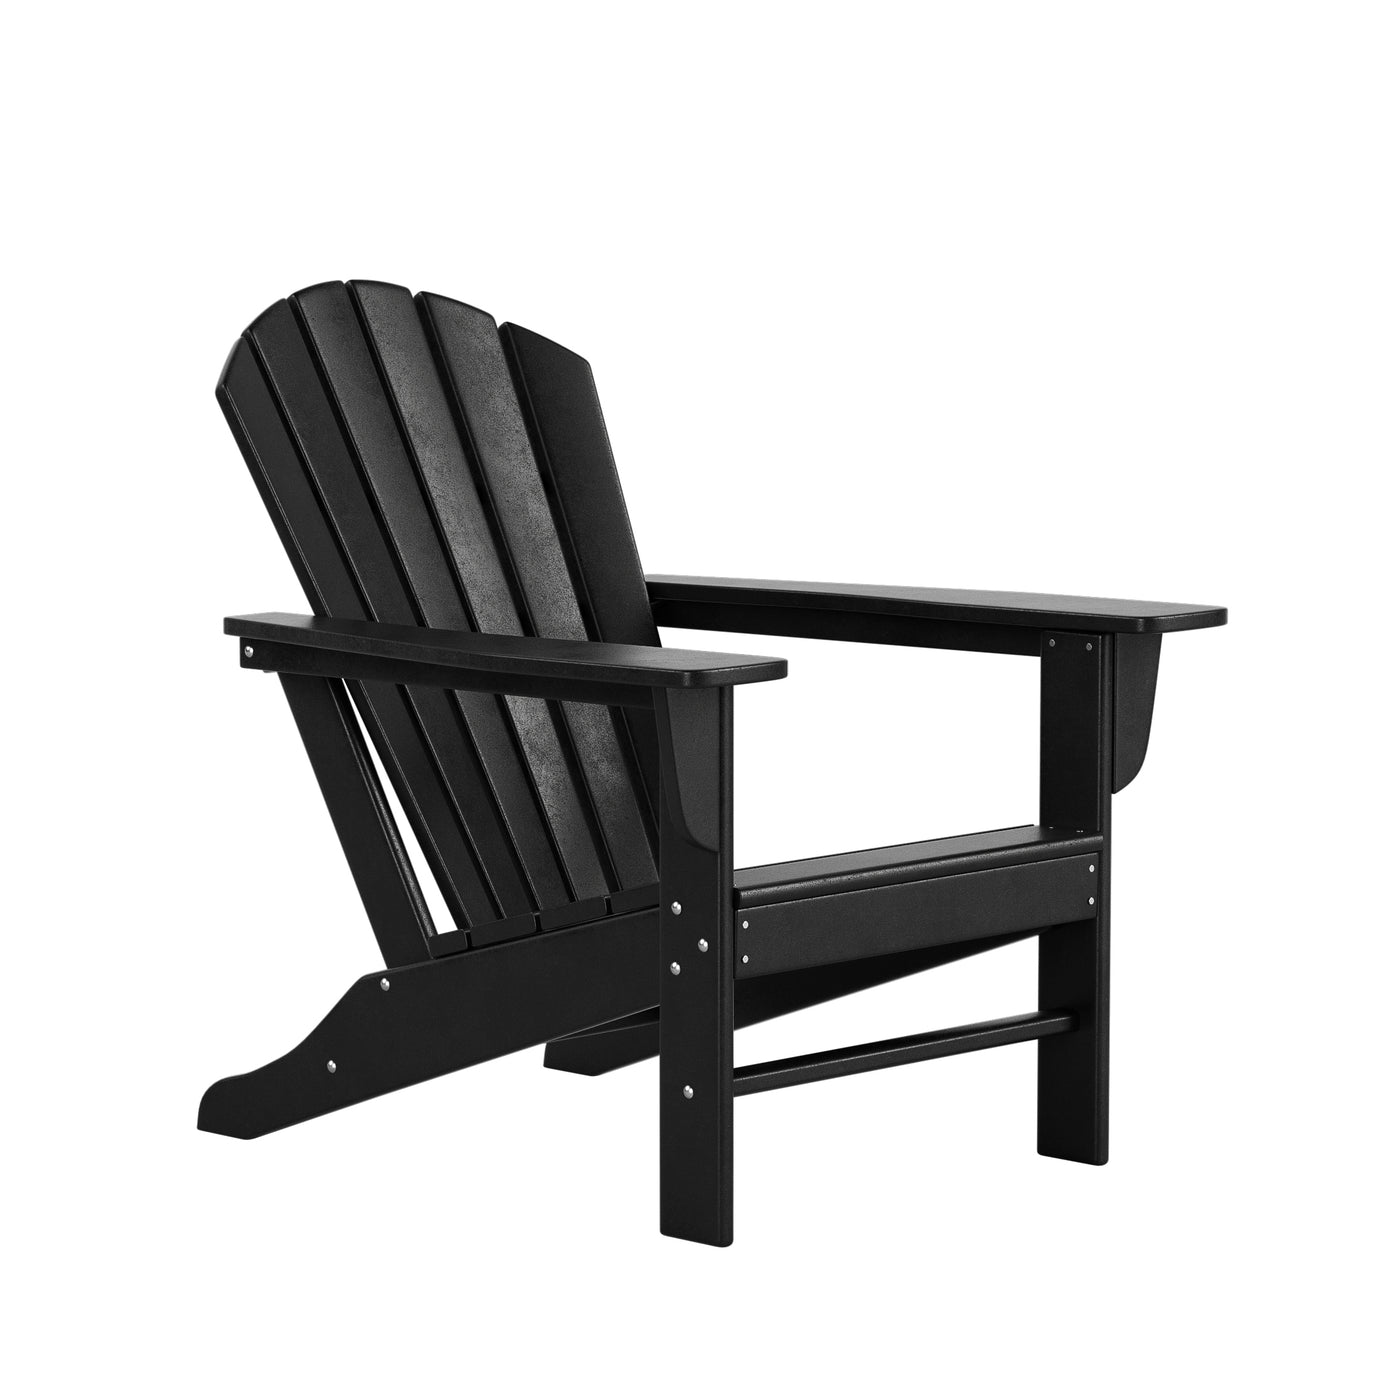 Dylan Outdoor Patio Adirondack Chair with Square Fire Pit Table Sets